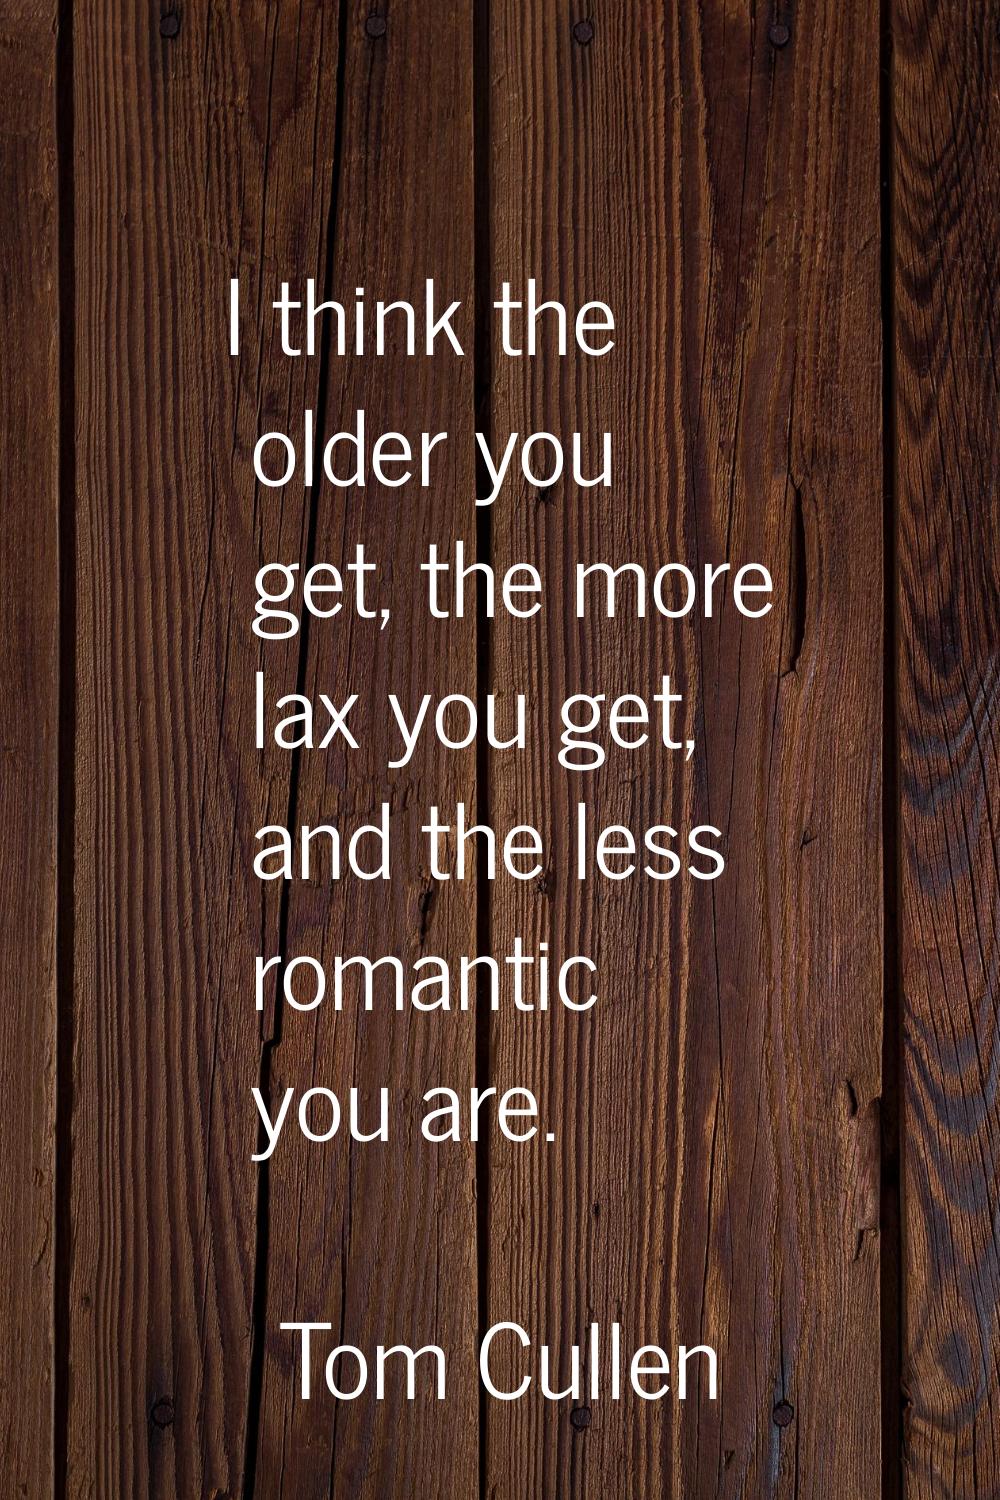 I think the older you get, the more lax you get, and the less romantic you are.